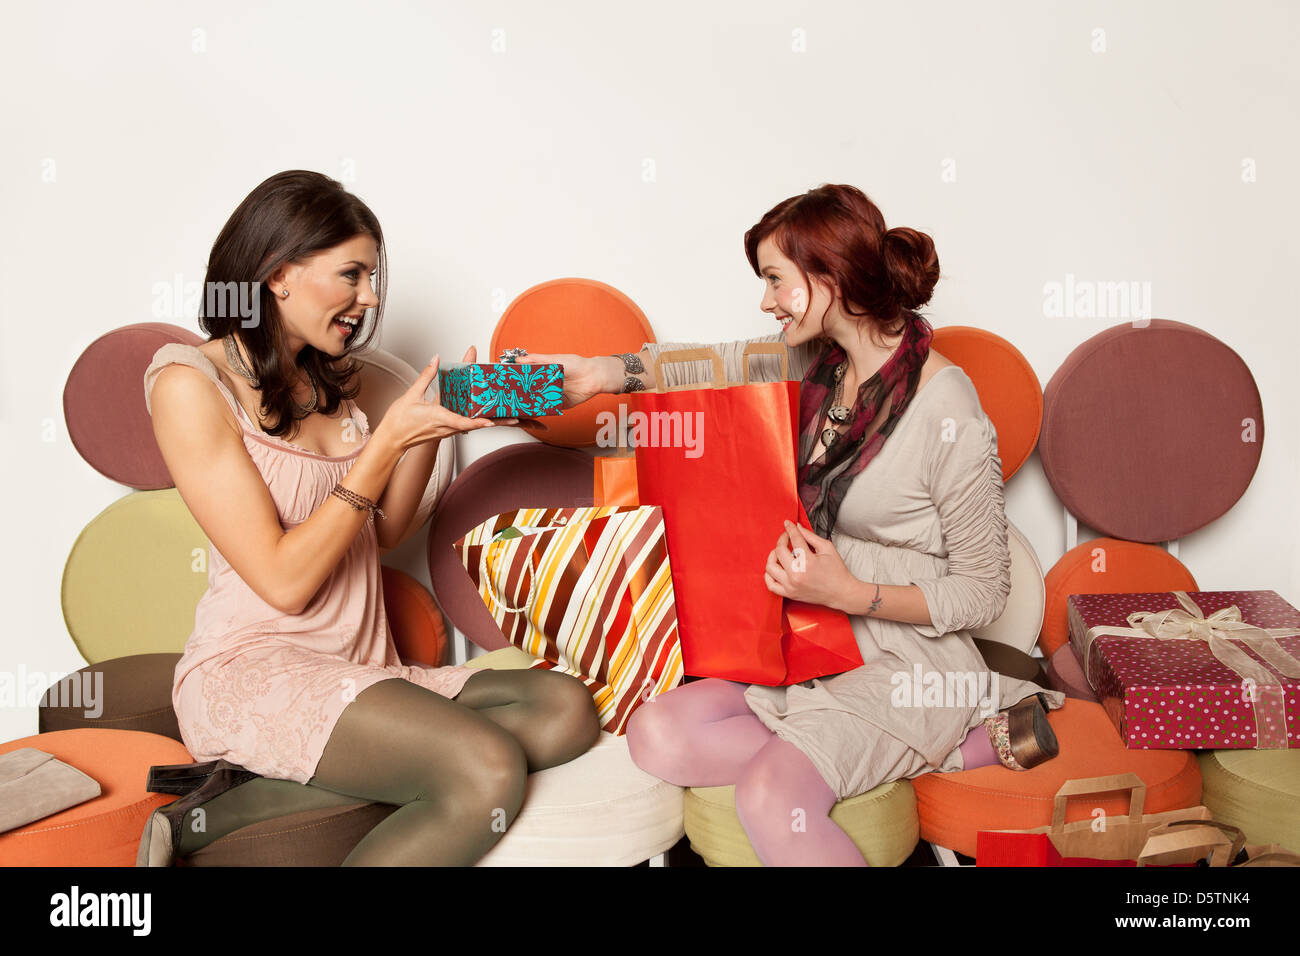 young girls exchanging gifts on a colorful sofa Stock Photo